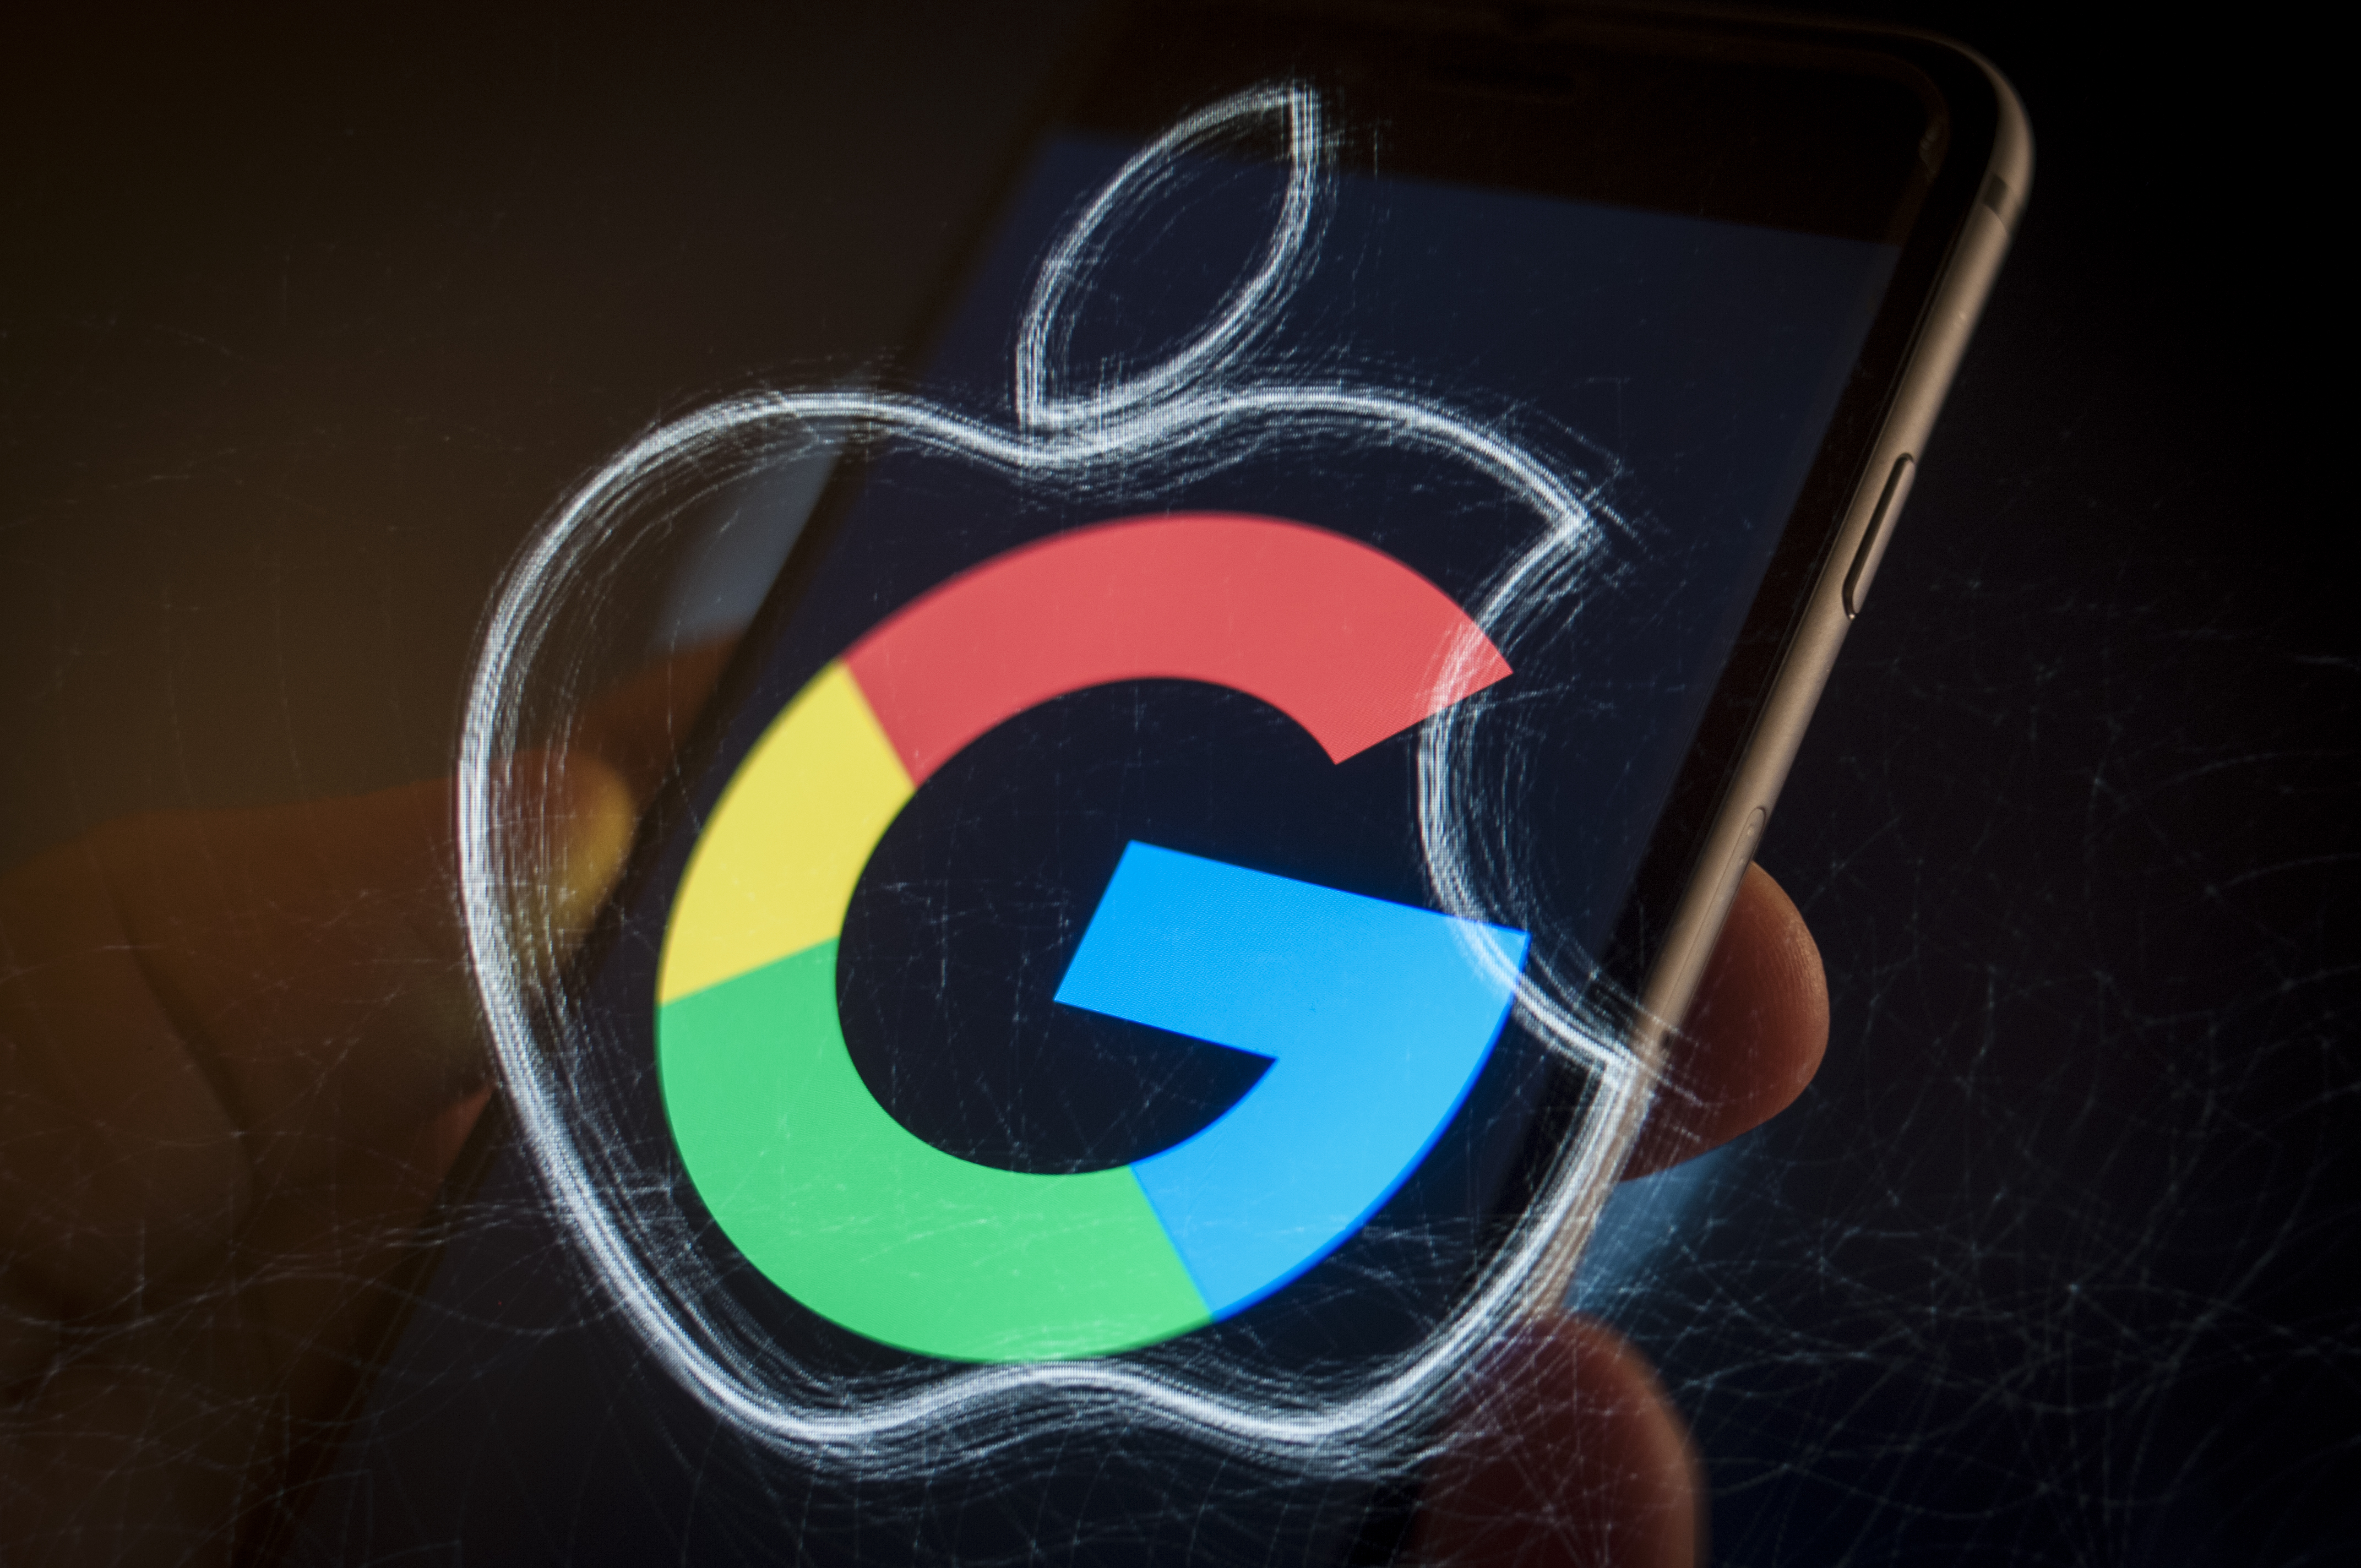 The Google G logo and the Apple logo superimposed on a smartphone held in a hand.